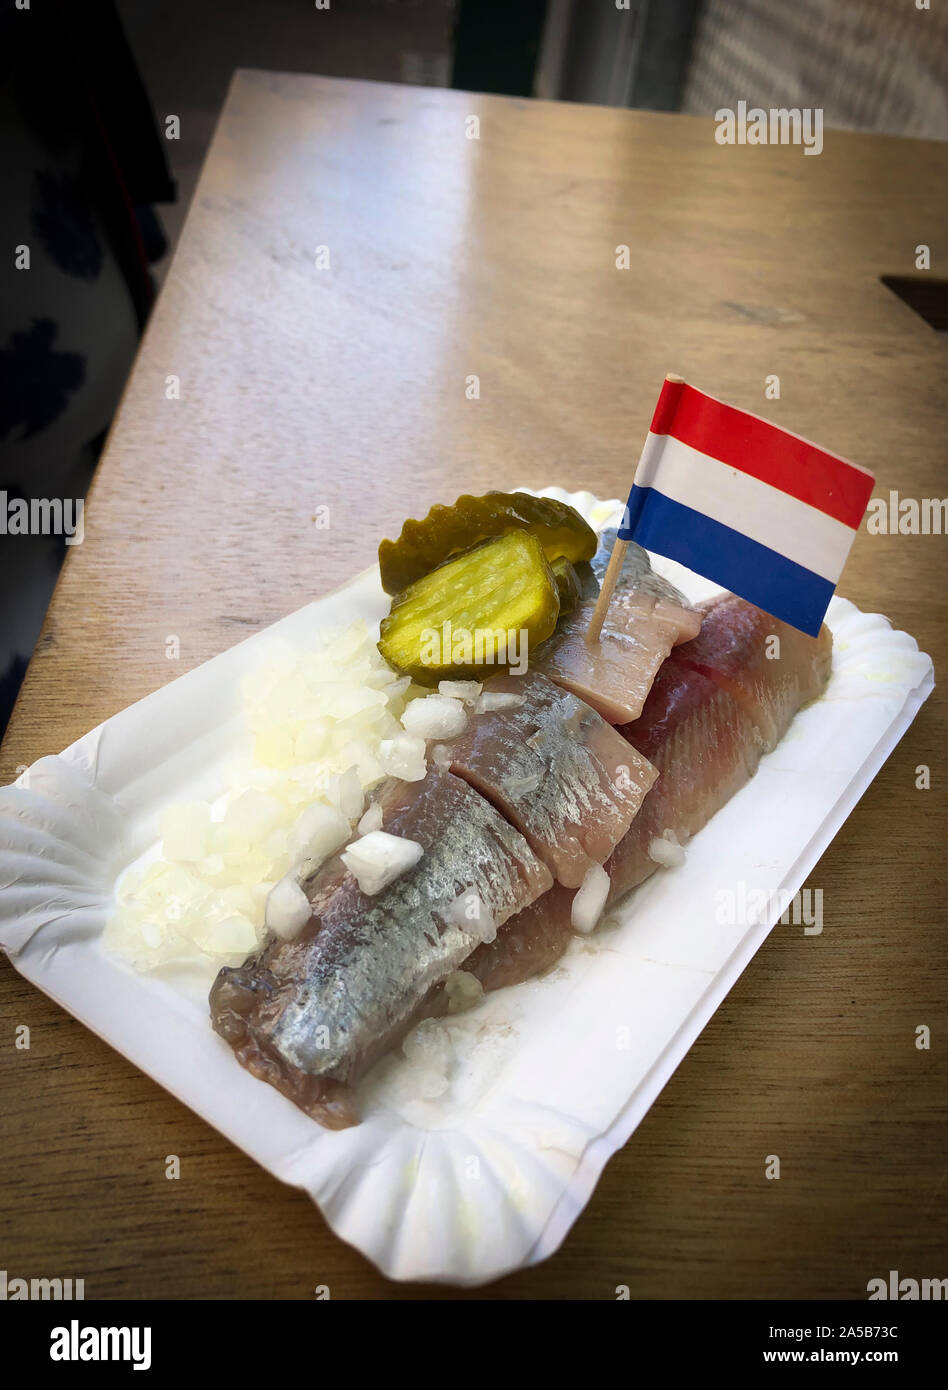 Haring ‘Hollandse Nieuwe’ (Dutch new herring), a famous Dutch food speciality. The raw herring is typically served as street food Stock Photo